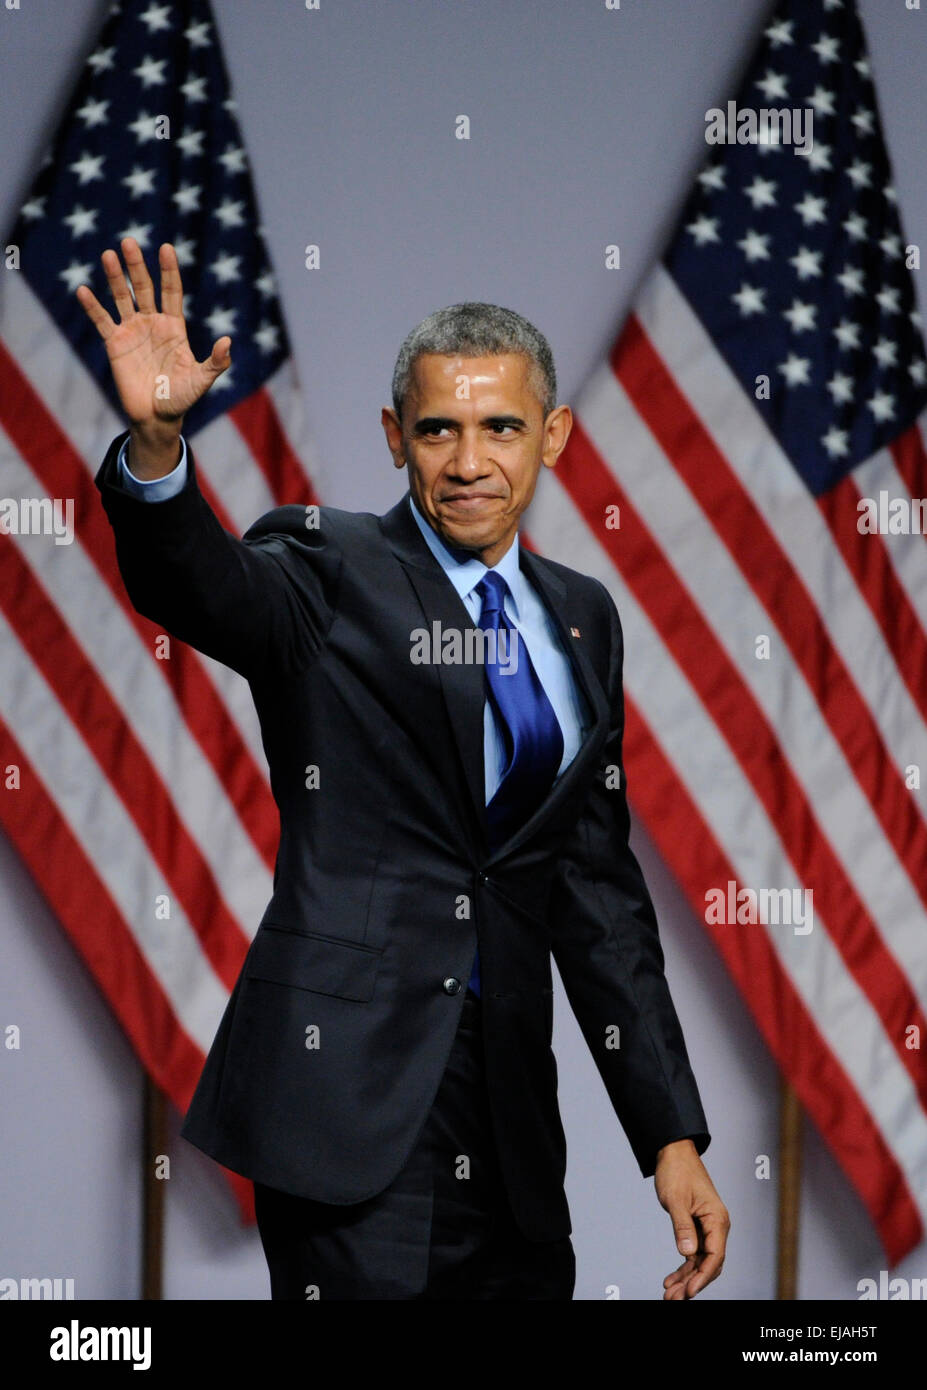 Washington, DC, USA. 23rd Mar, 2015. U.S. President Barack Obama greets audiences during the 2015 SelectUSA Investment Summit in Washington, DC, capital of the United States, March 23, 2015. U.S. President Barack Obama on Monday announced a series of new measures to lure more foreign investment and bolster economic recovery. Credit:  Bao Dandan/Xinhua/Alamy Live News Stock Photo